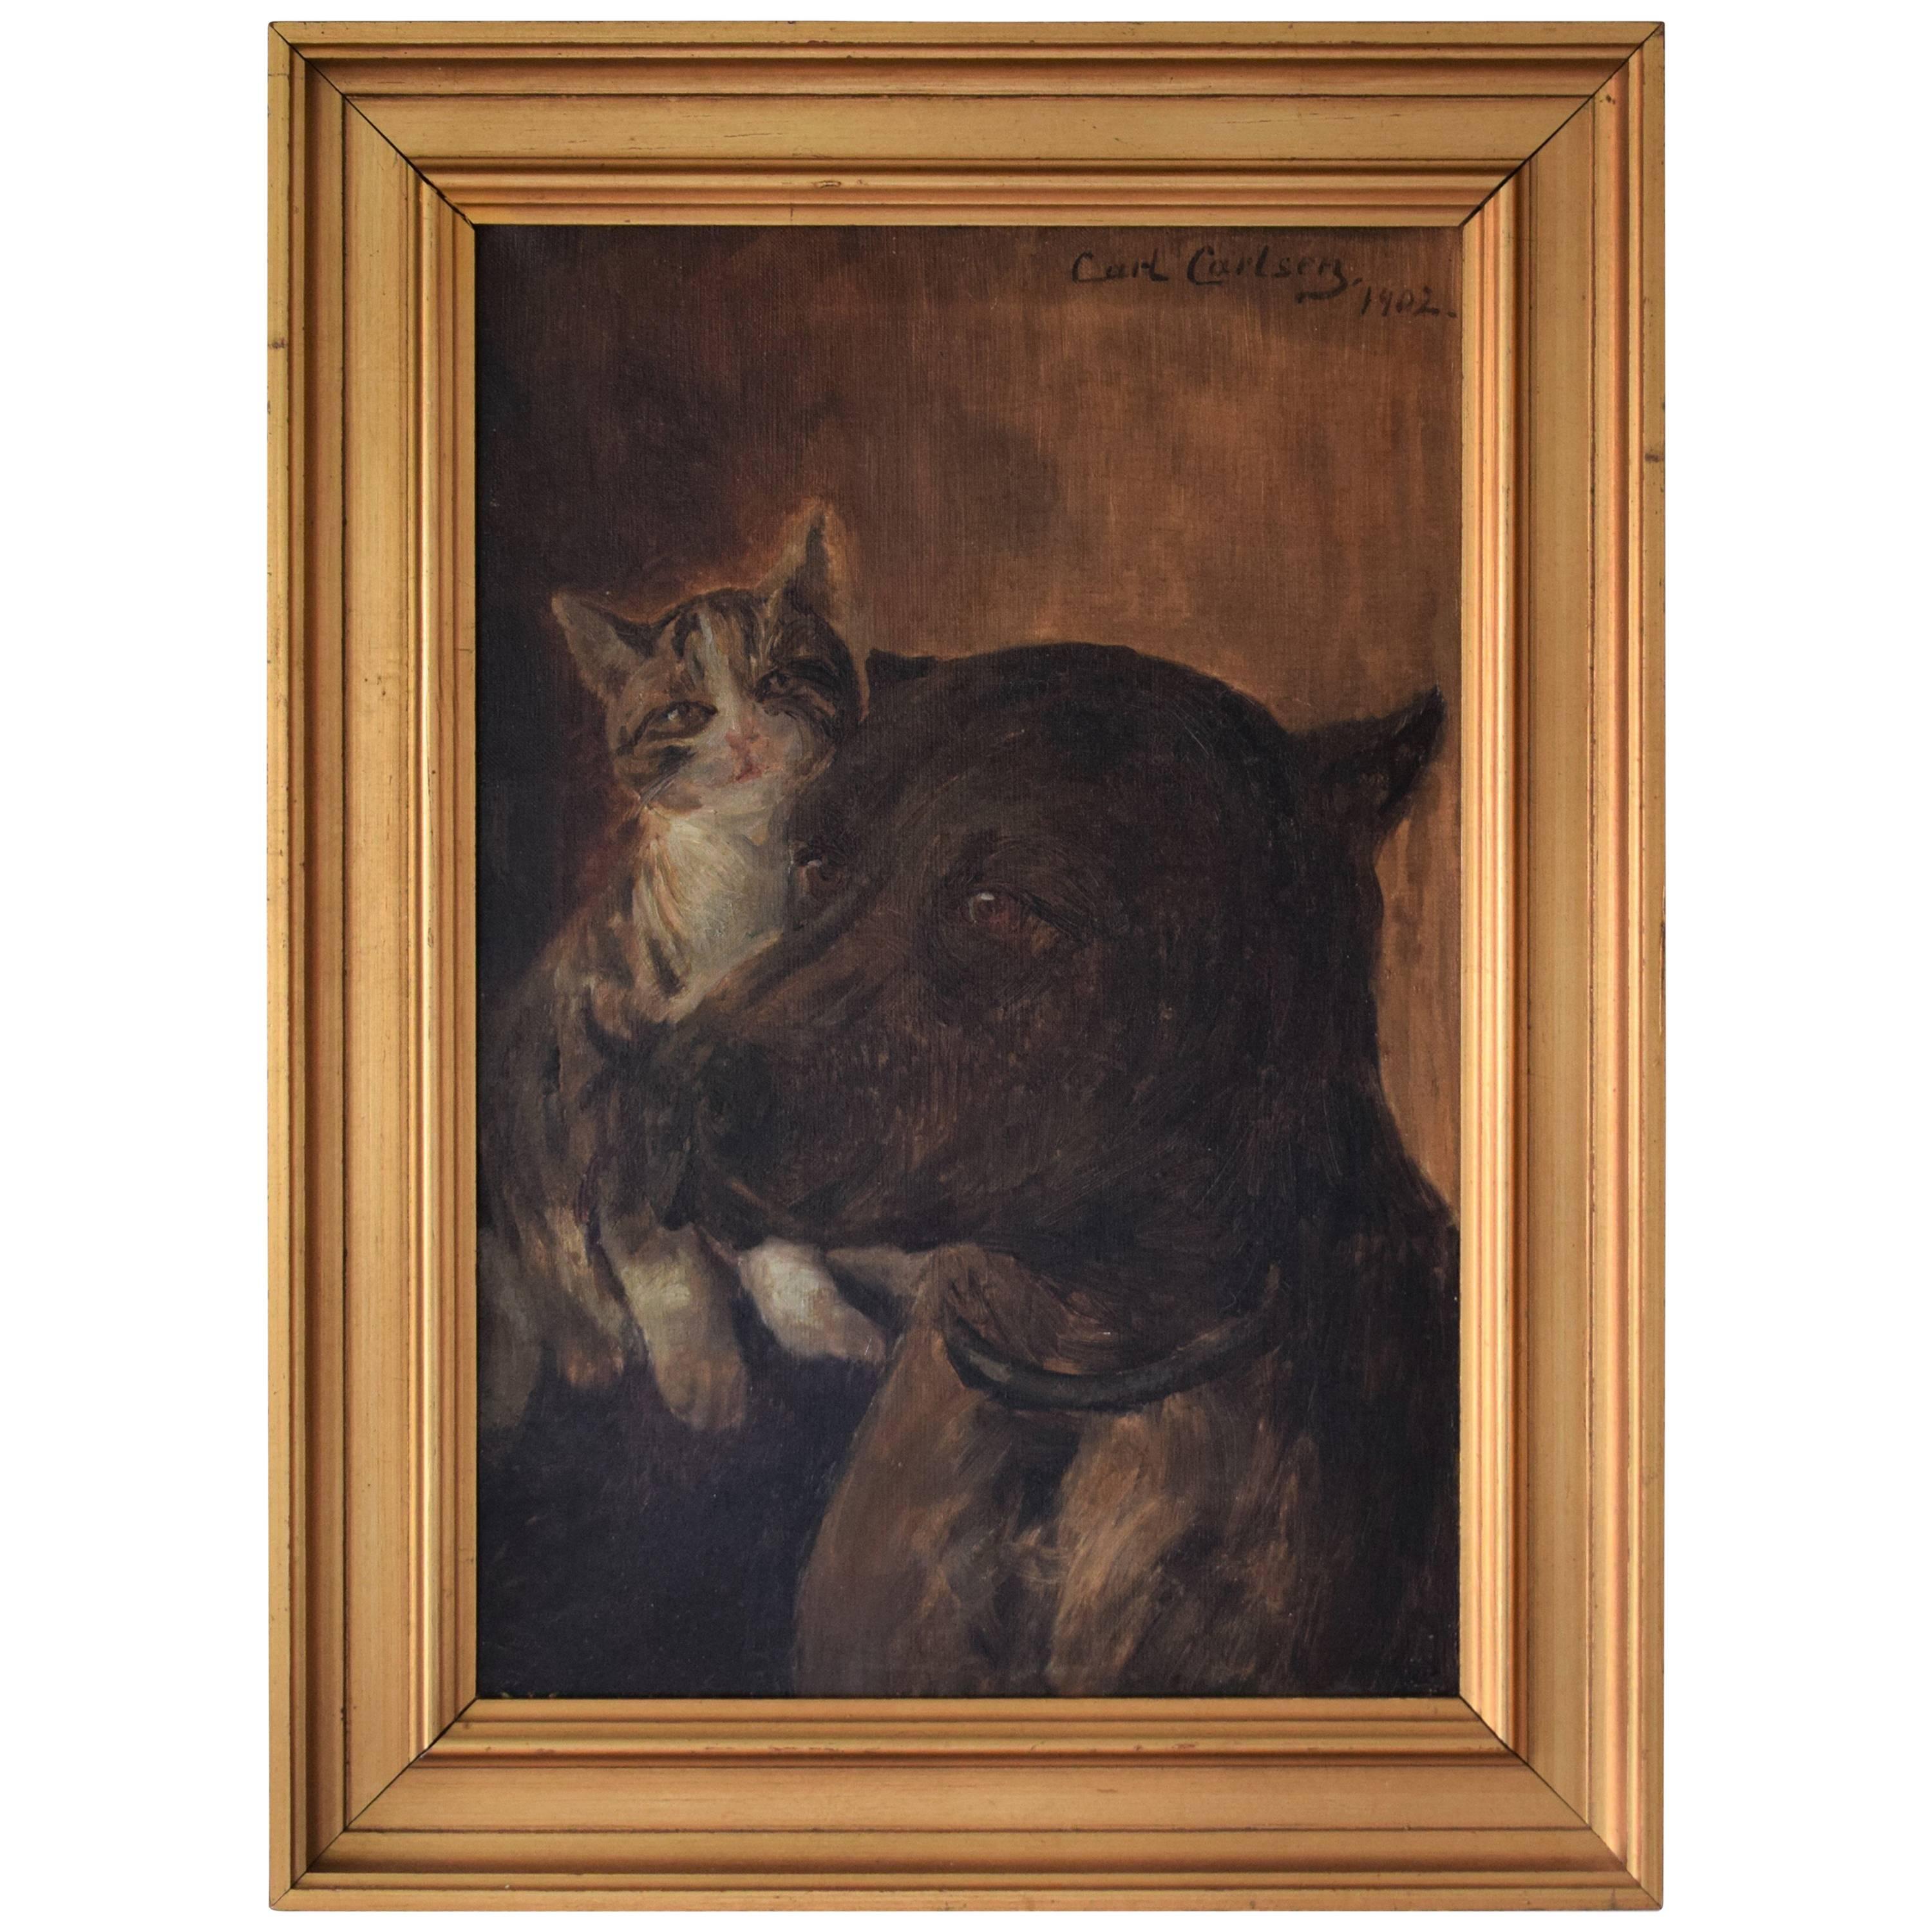 Early 20th Century Oil Painting of Dog and Cat by Carl Carlsen